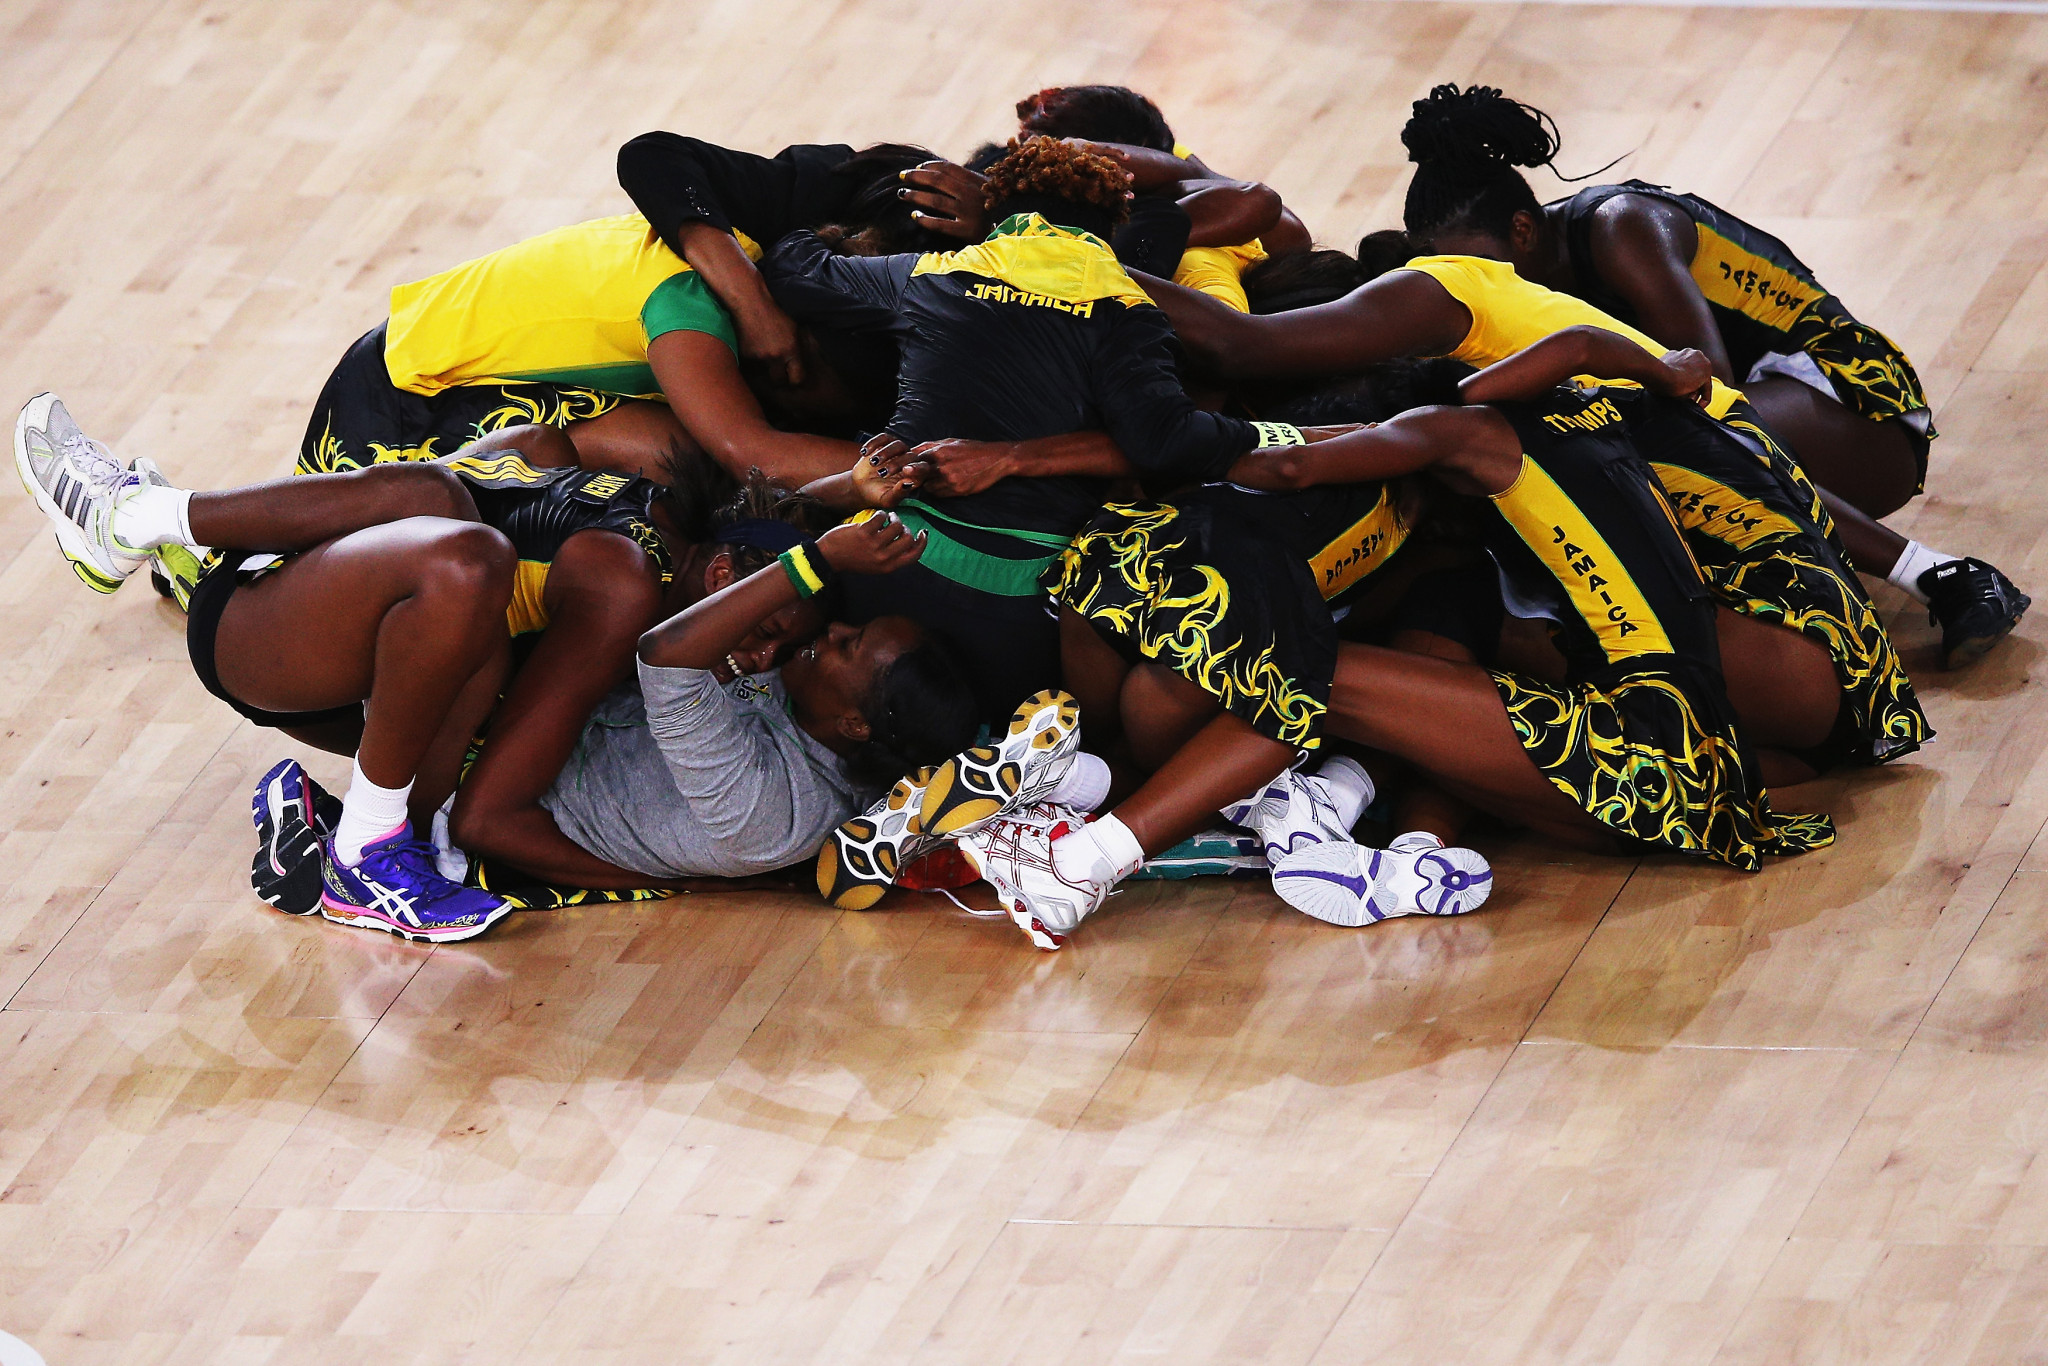 Jamaica celebrate winning a Commonwealth Games bronze medal in netball at Glasgow 2014 ©Getty Images